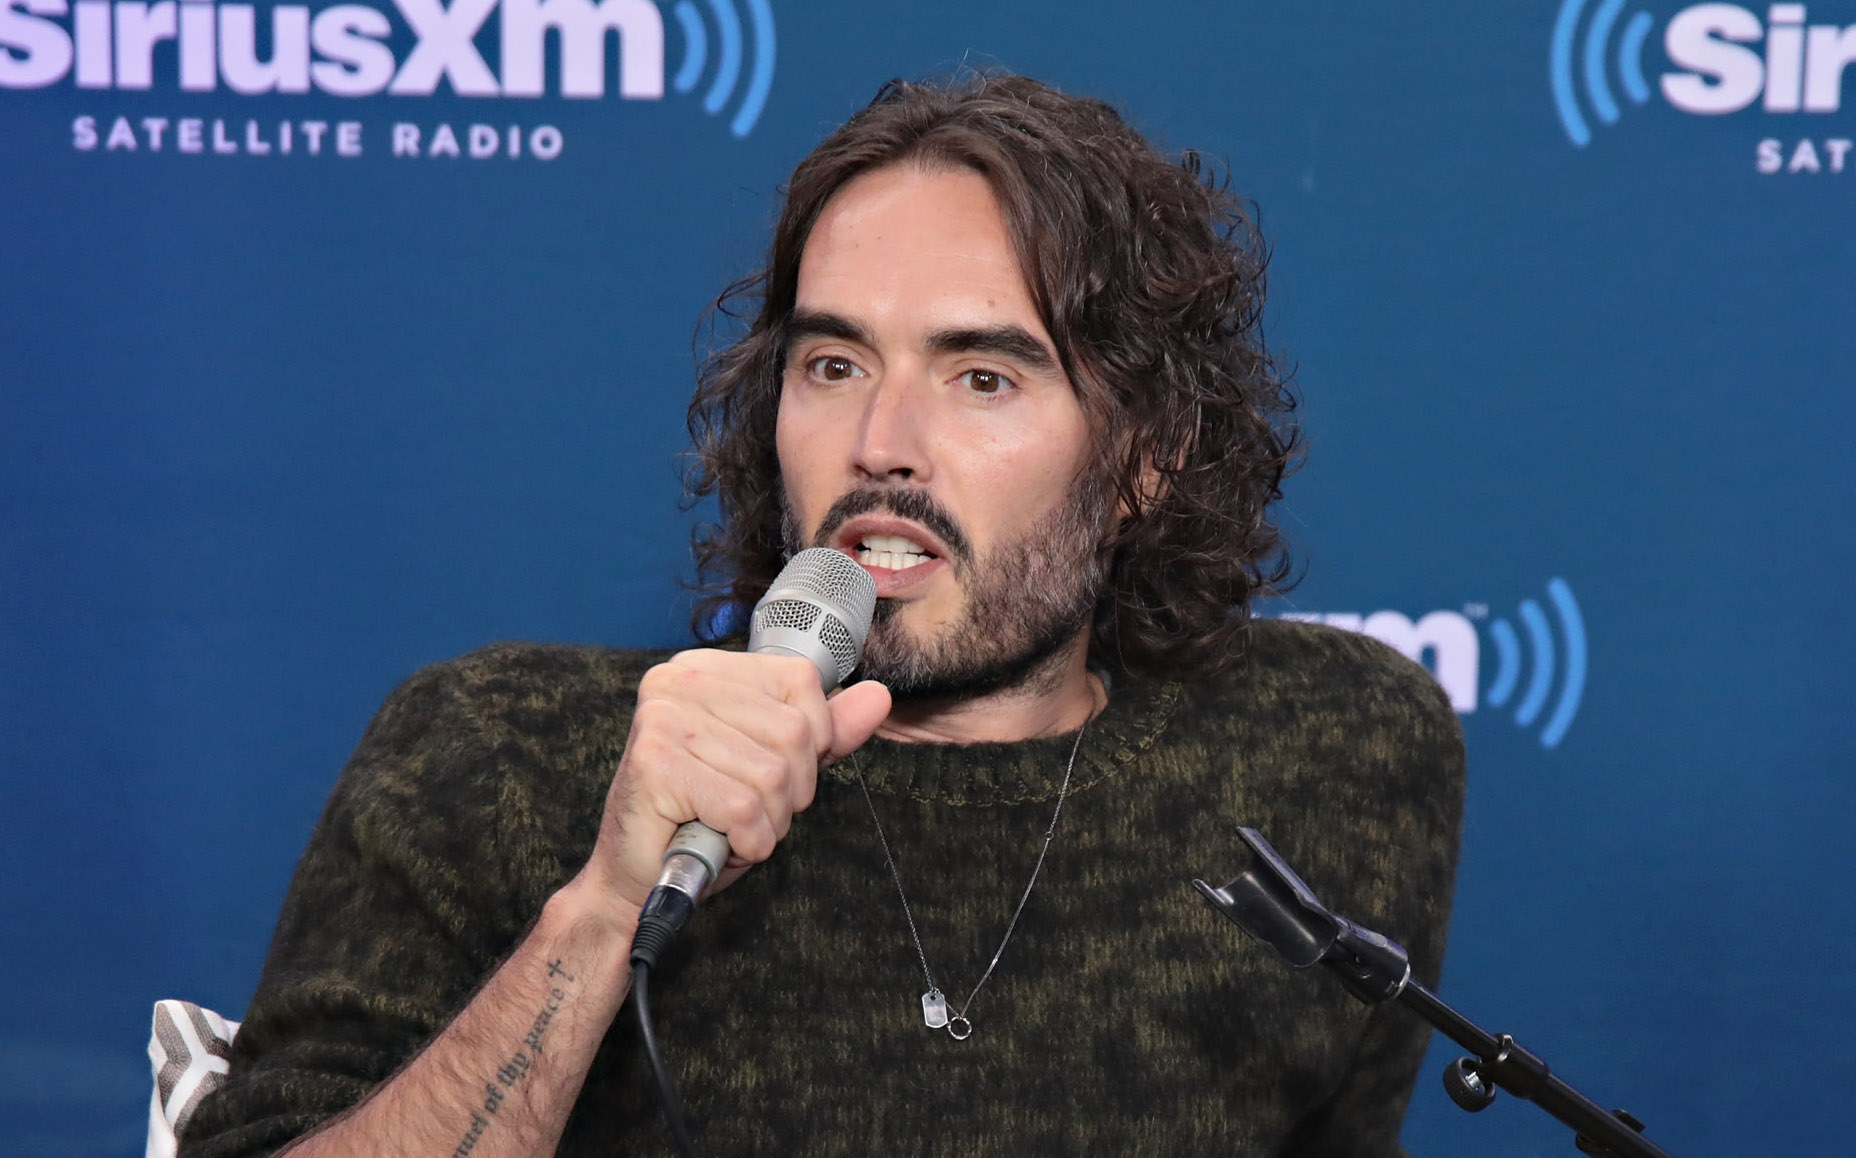 Russell Brand Describes Weekend Baptism as “Incredible and Overwhelming